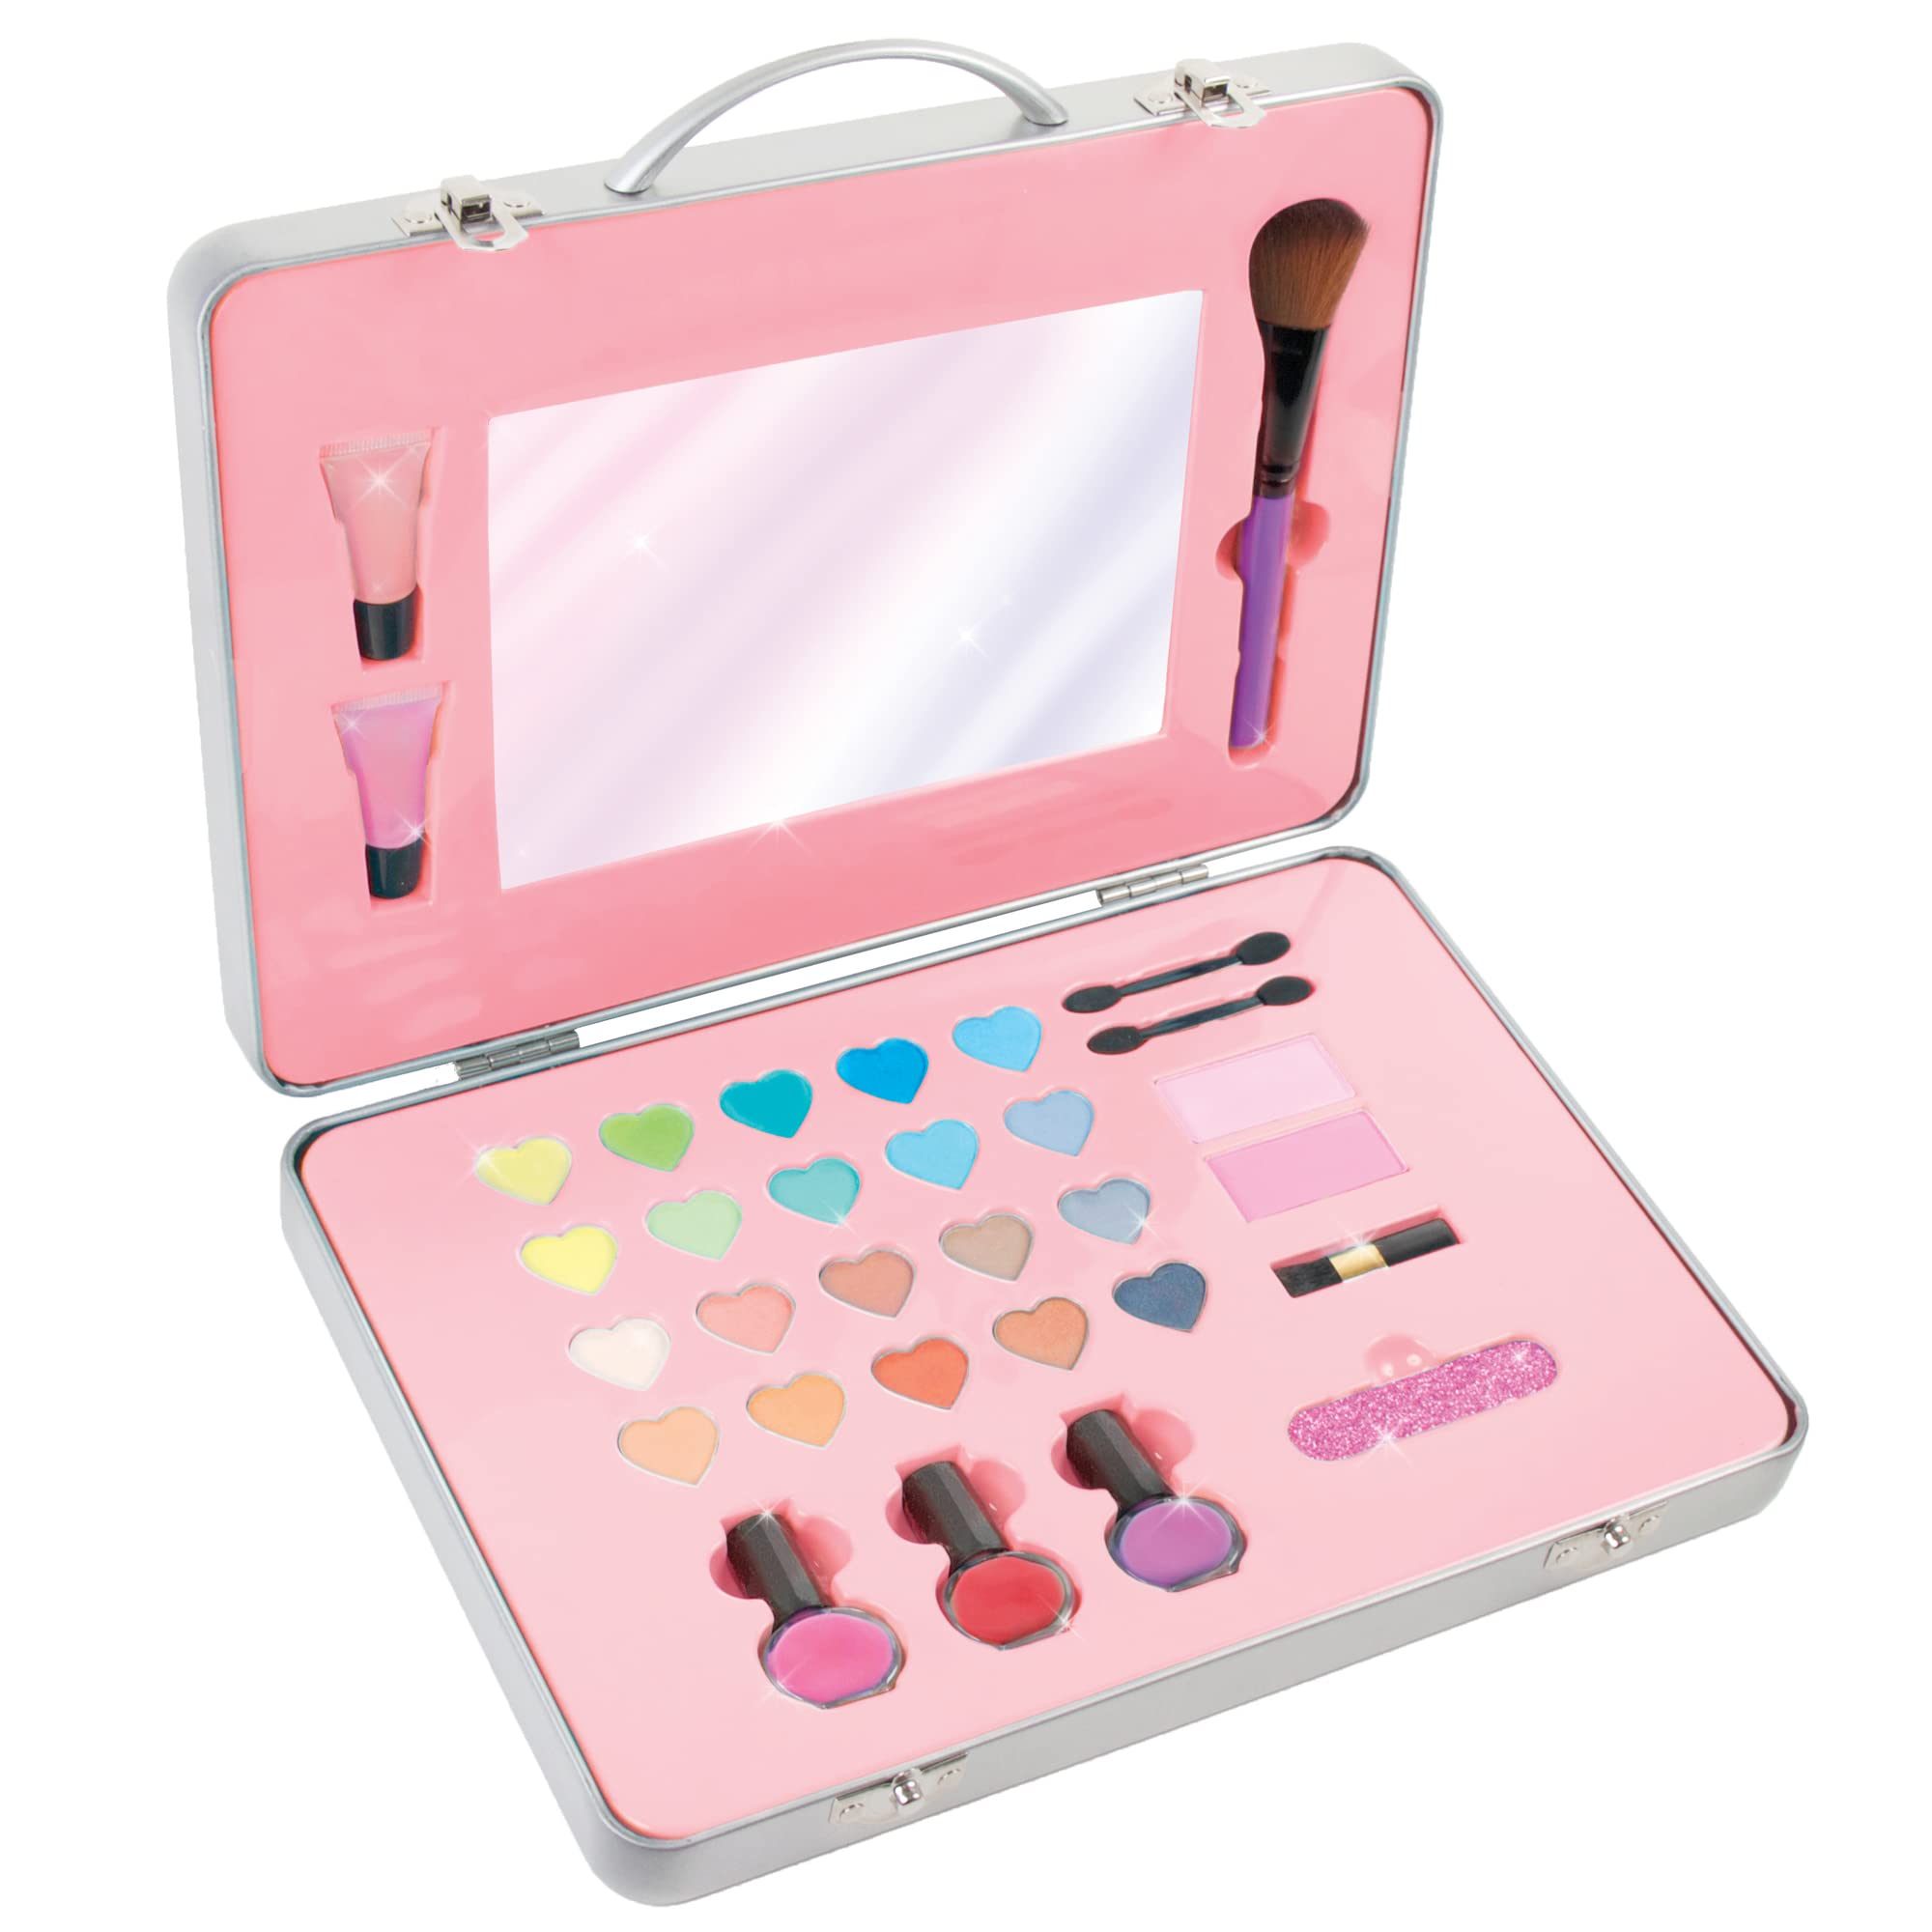 Make It Real: Glam Makeup Set - 10 Piece Travel Hard Case, Tweens & Girls, All-in-One Cosmetic & Beauty Kit, Includes Instrumental Dream Guide for Inspiration, Nails-Lips-Face, Kids Ages 8+